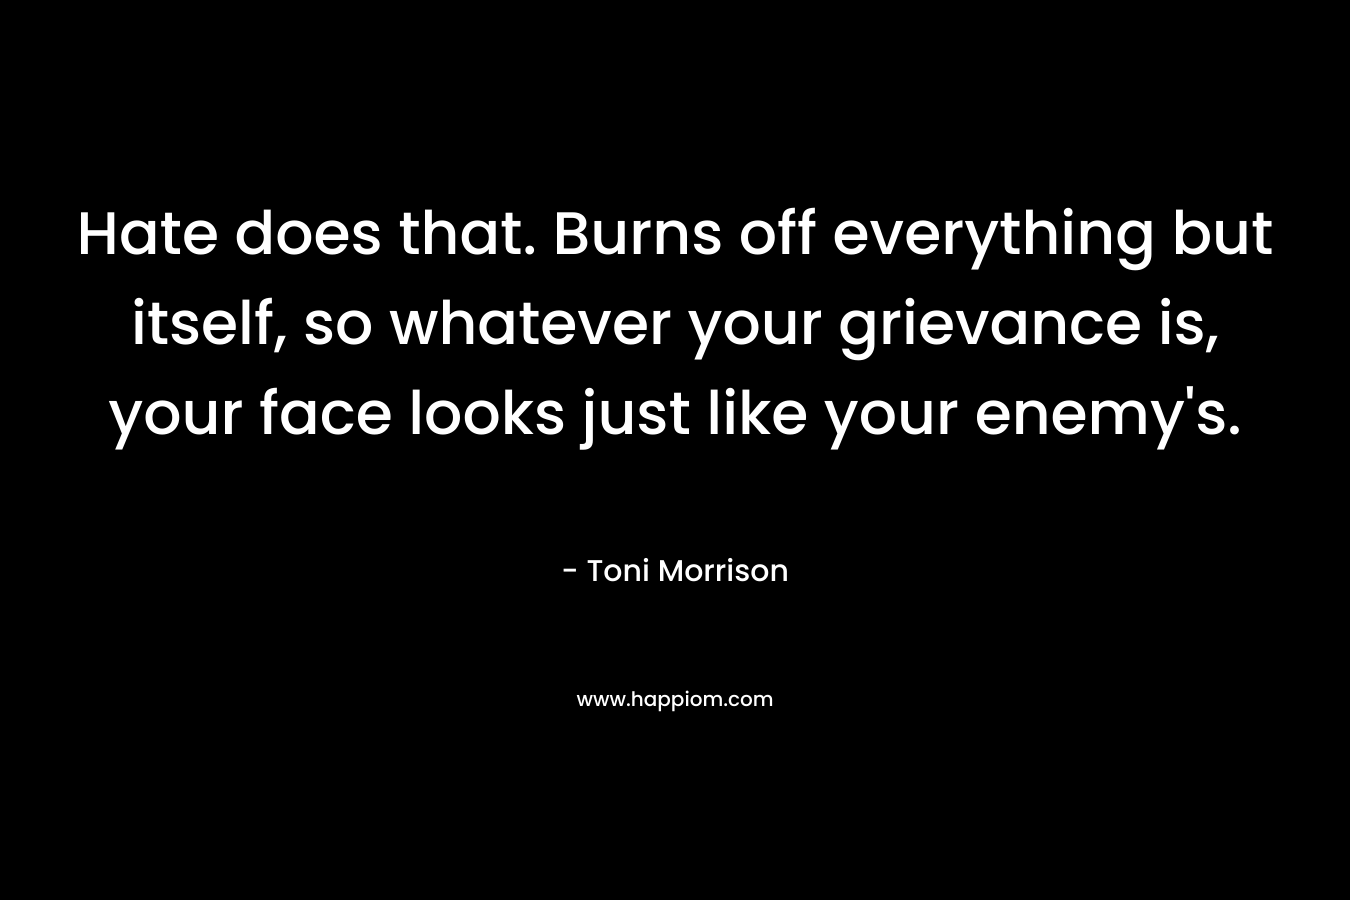 Hate does that. Burns off everything but itself, so whatever your grievance is, your face looks just like your enemy’s. – Toni Morrison